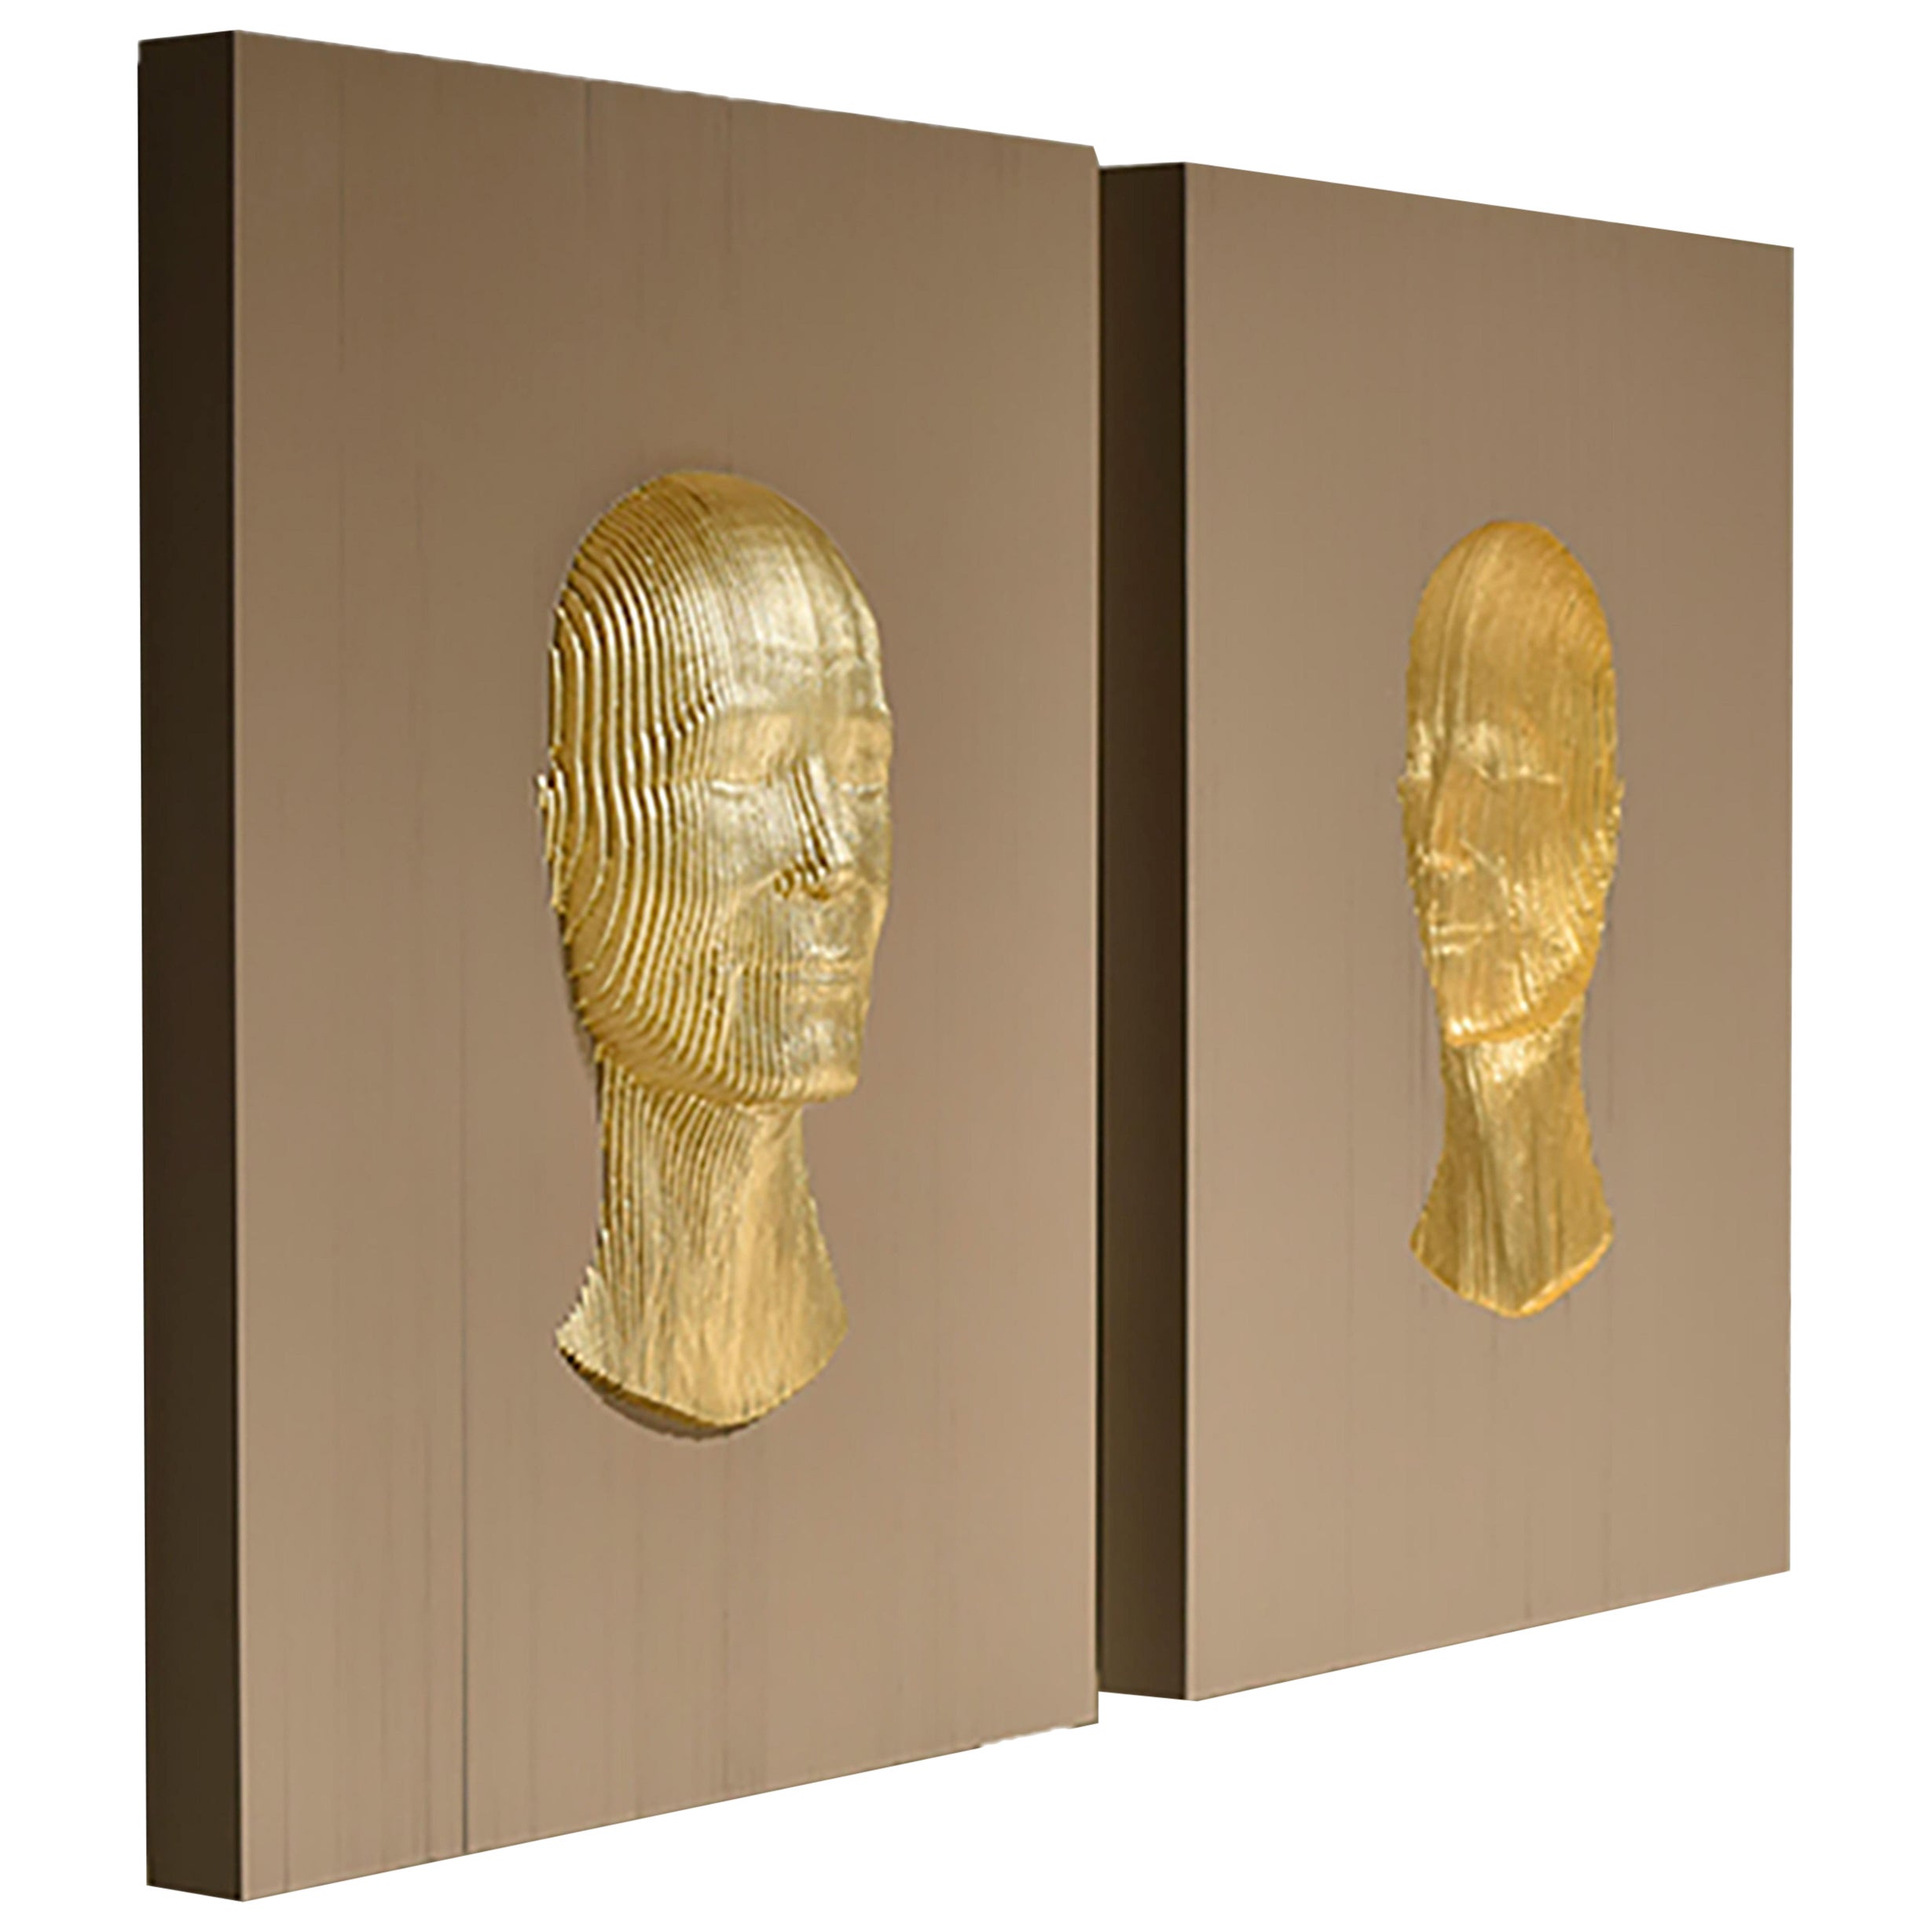 Inner Face - Outer Face Bronze by Piegatto, a Contemporary Wall Sculpture For Sale